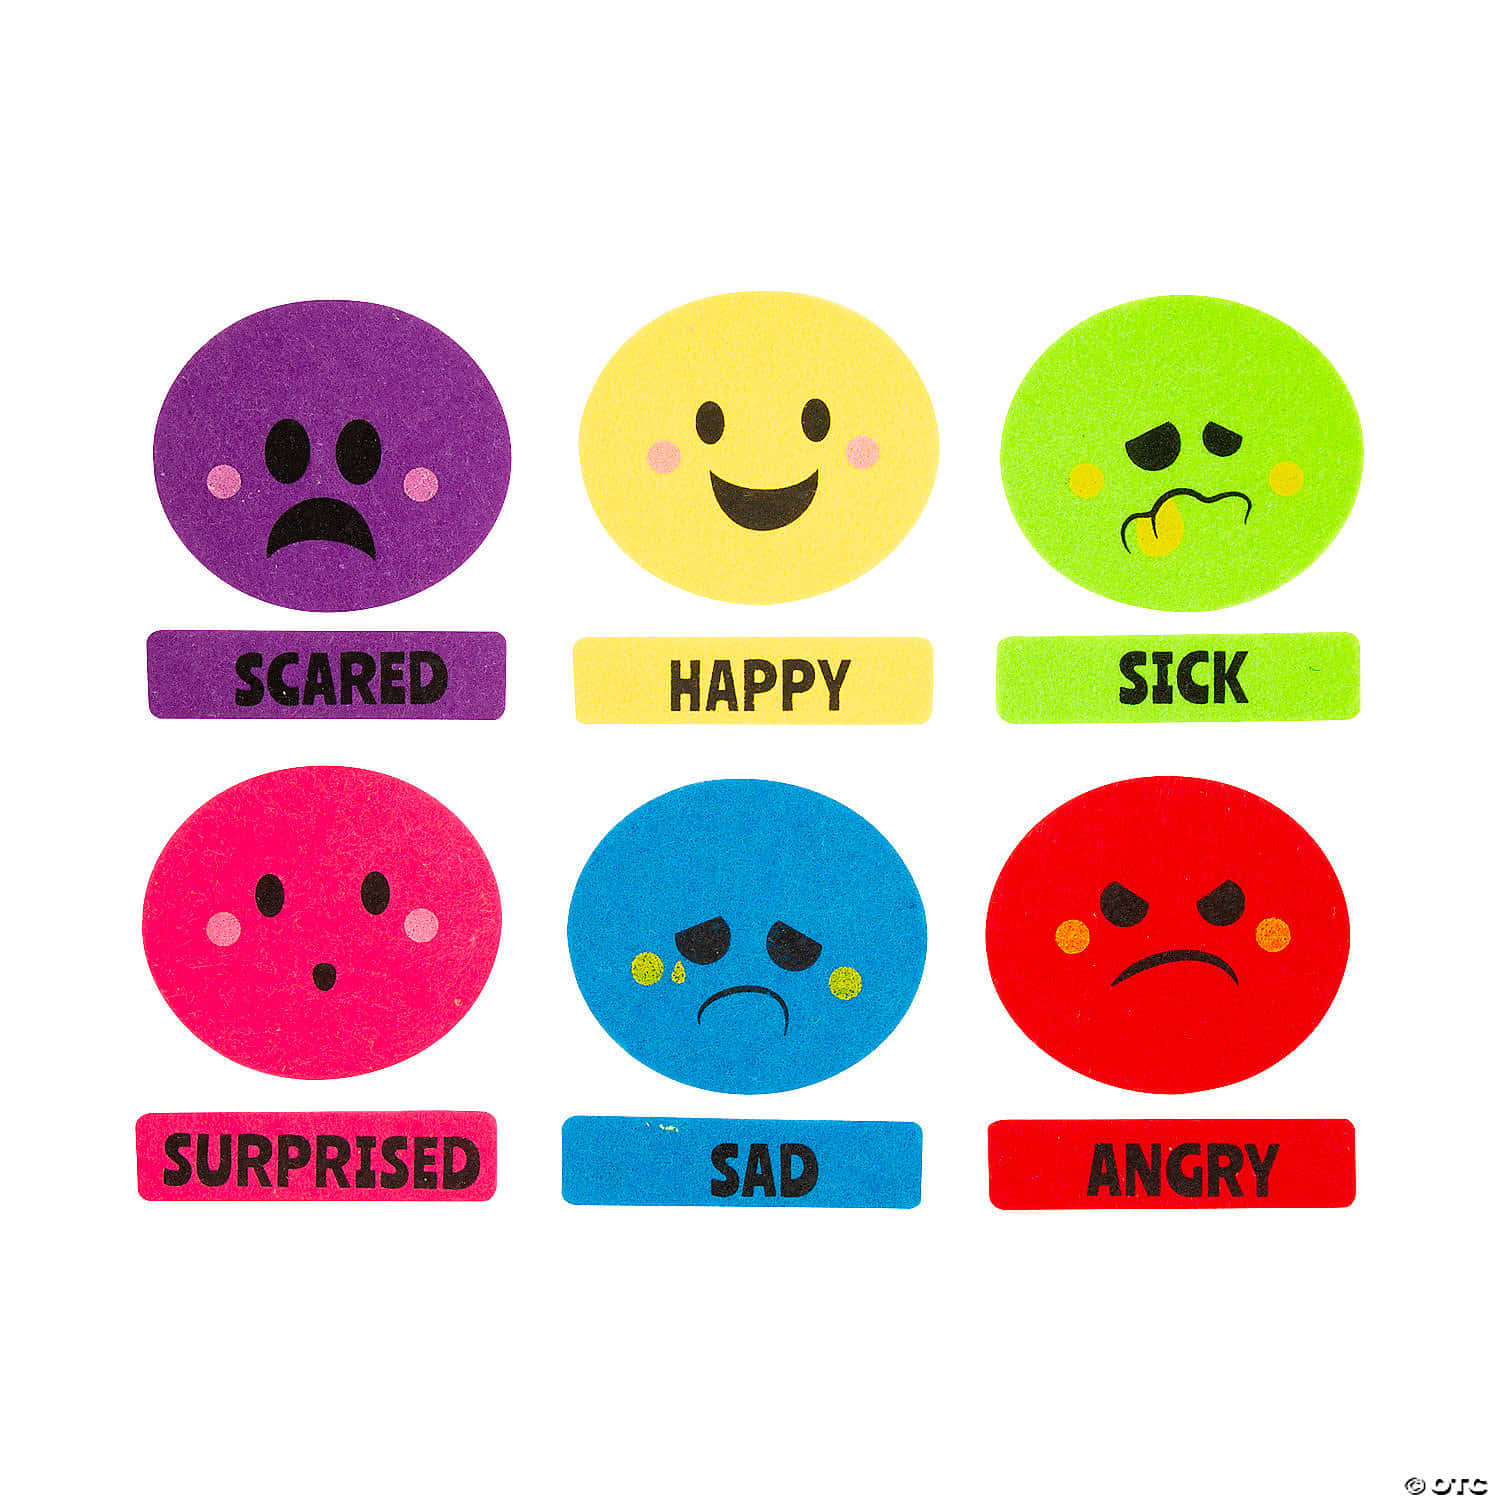 A Set Of Colorful Emoticons With The Words Sad, Scared, And Upset